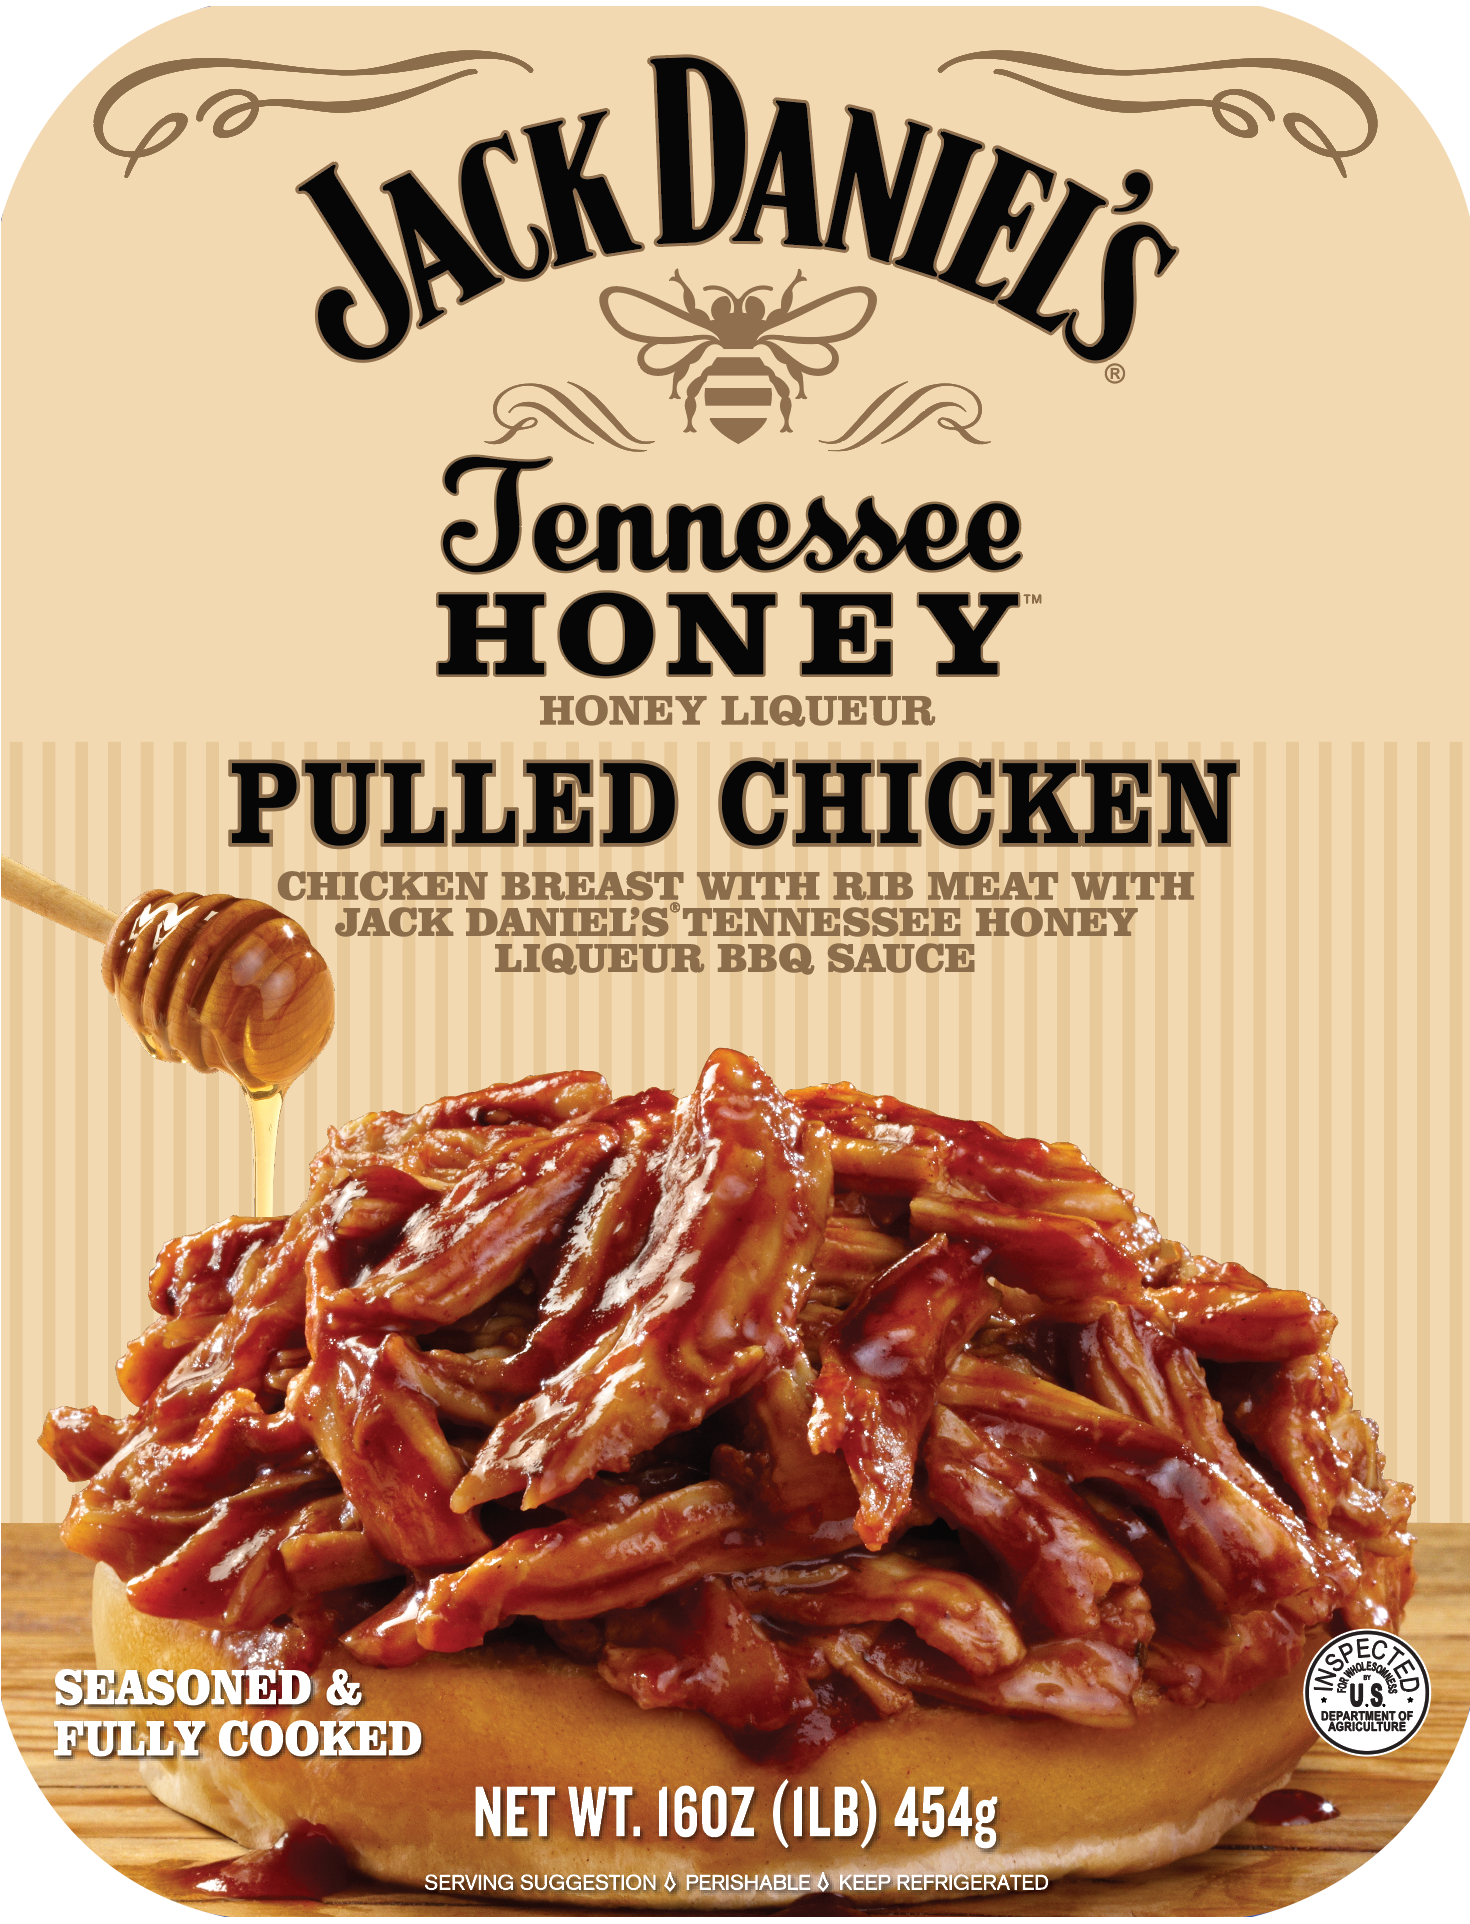 Packaging for Tennessee Honey Pulled Chicken